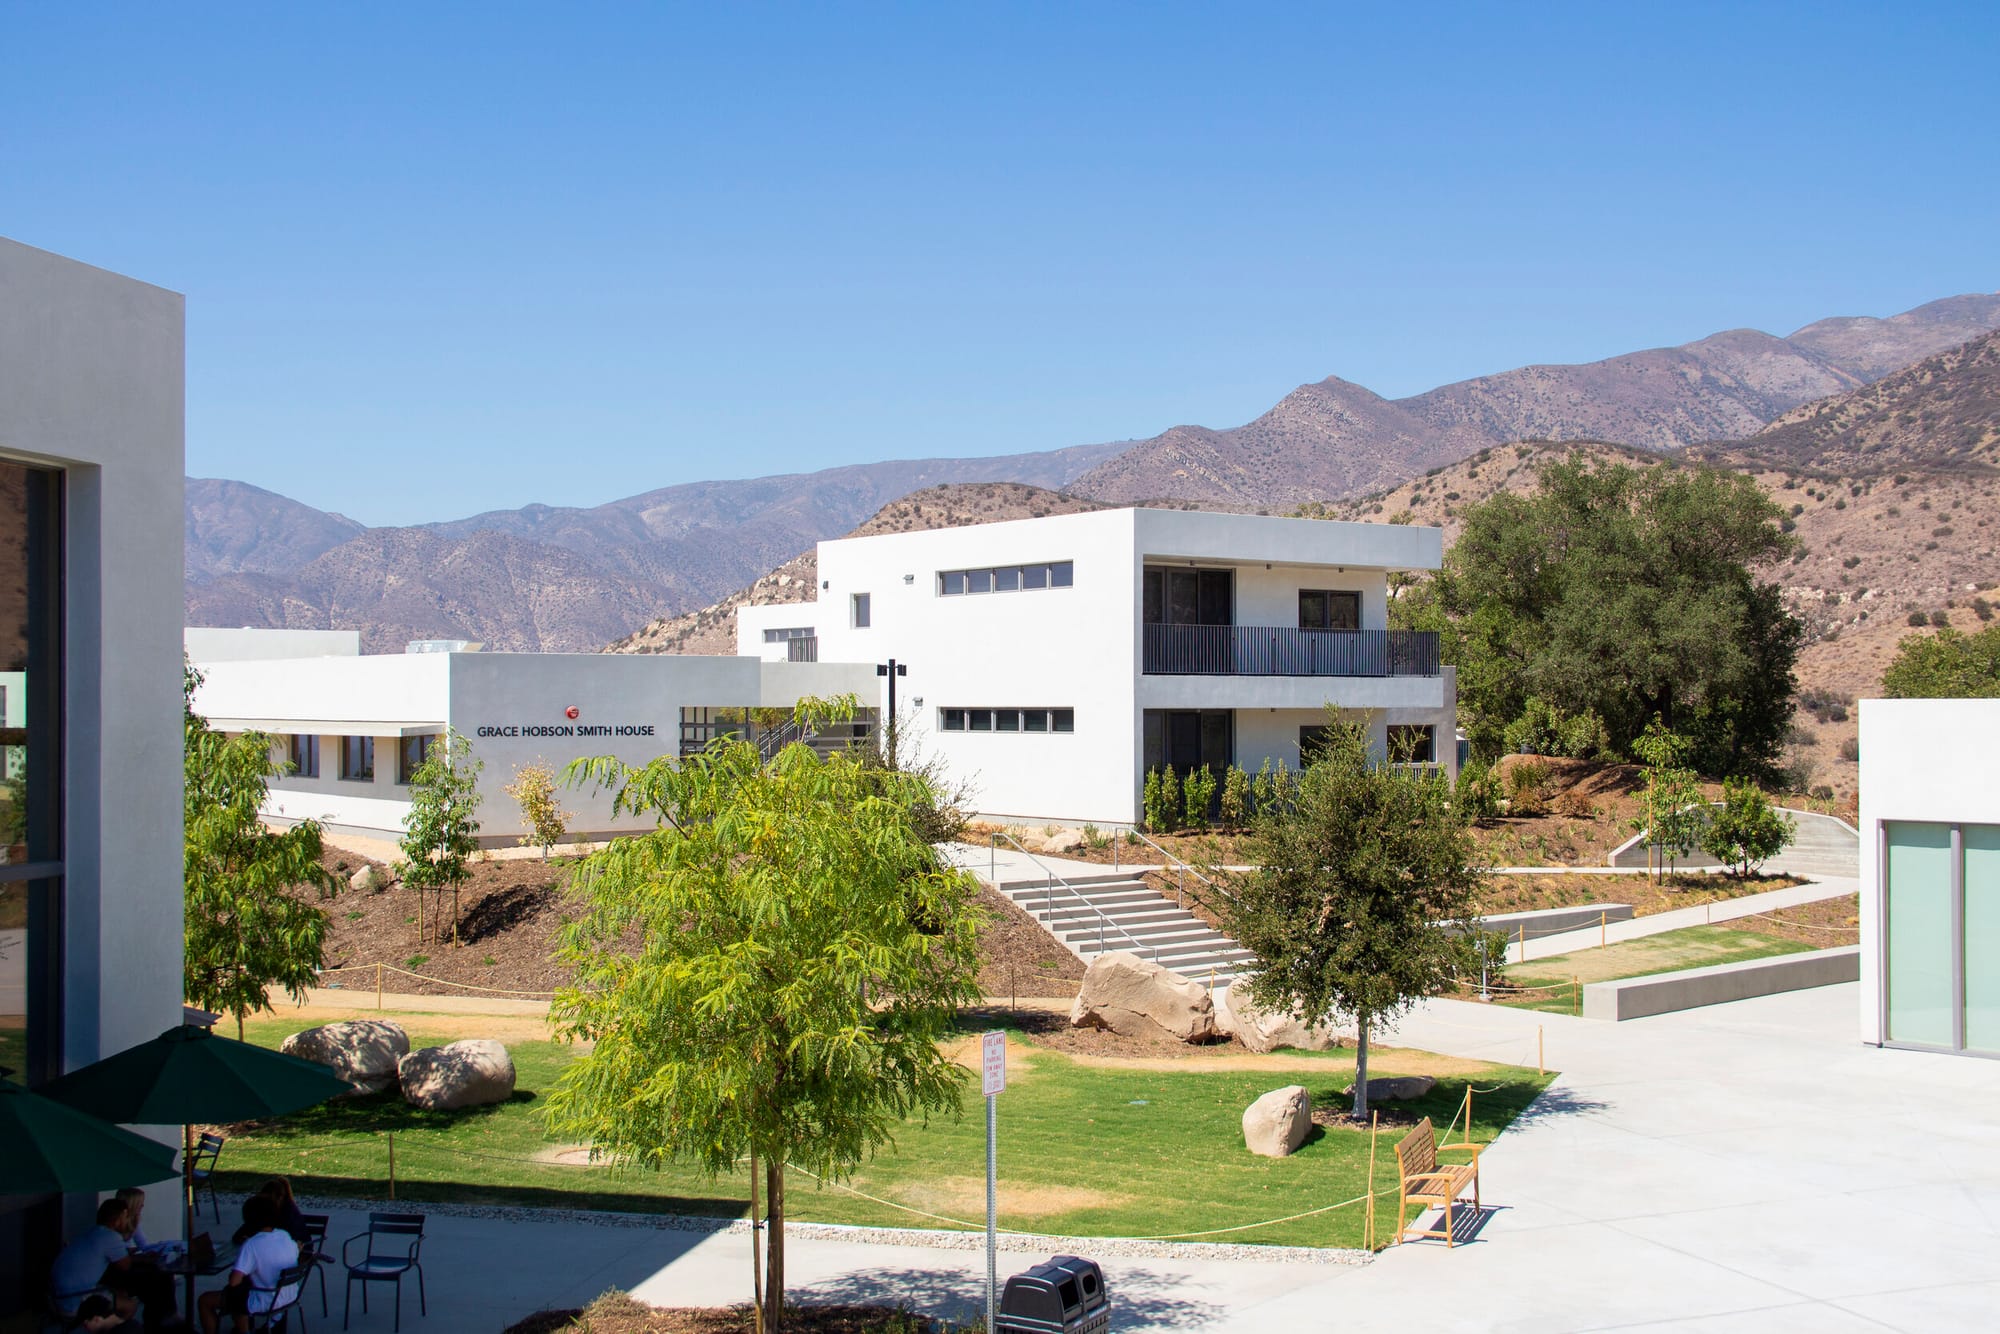 Landscape and Maintenance Worker at Ojai Valley School, California